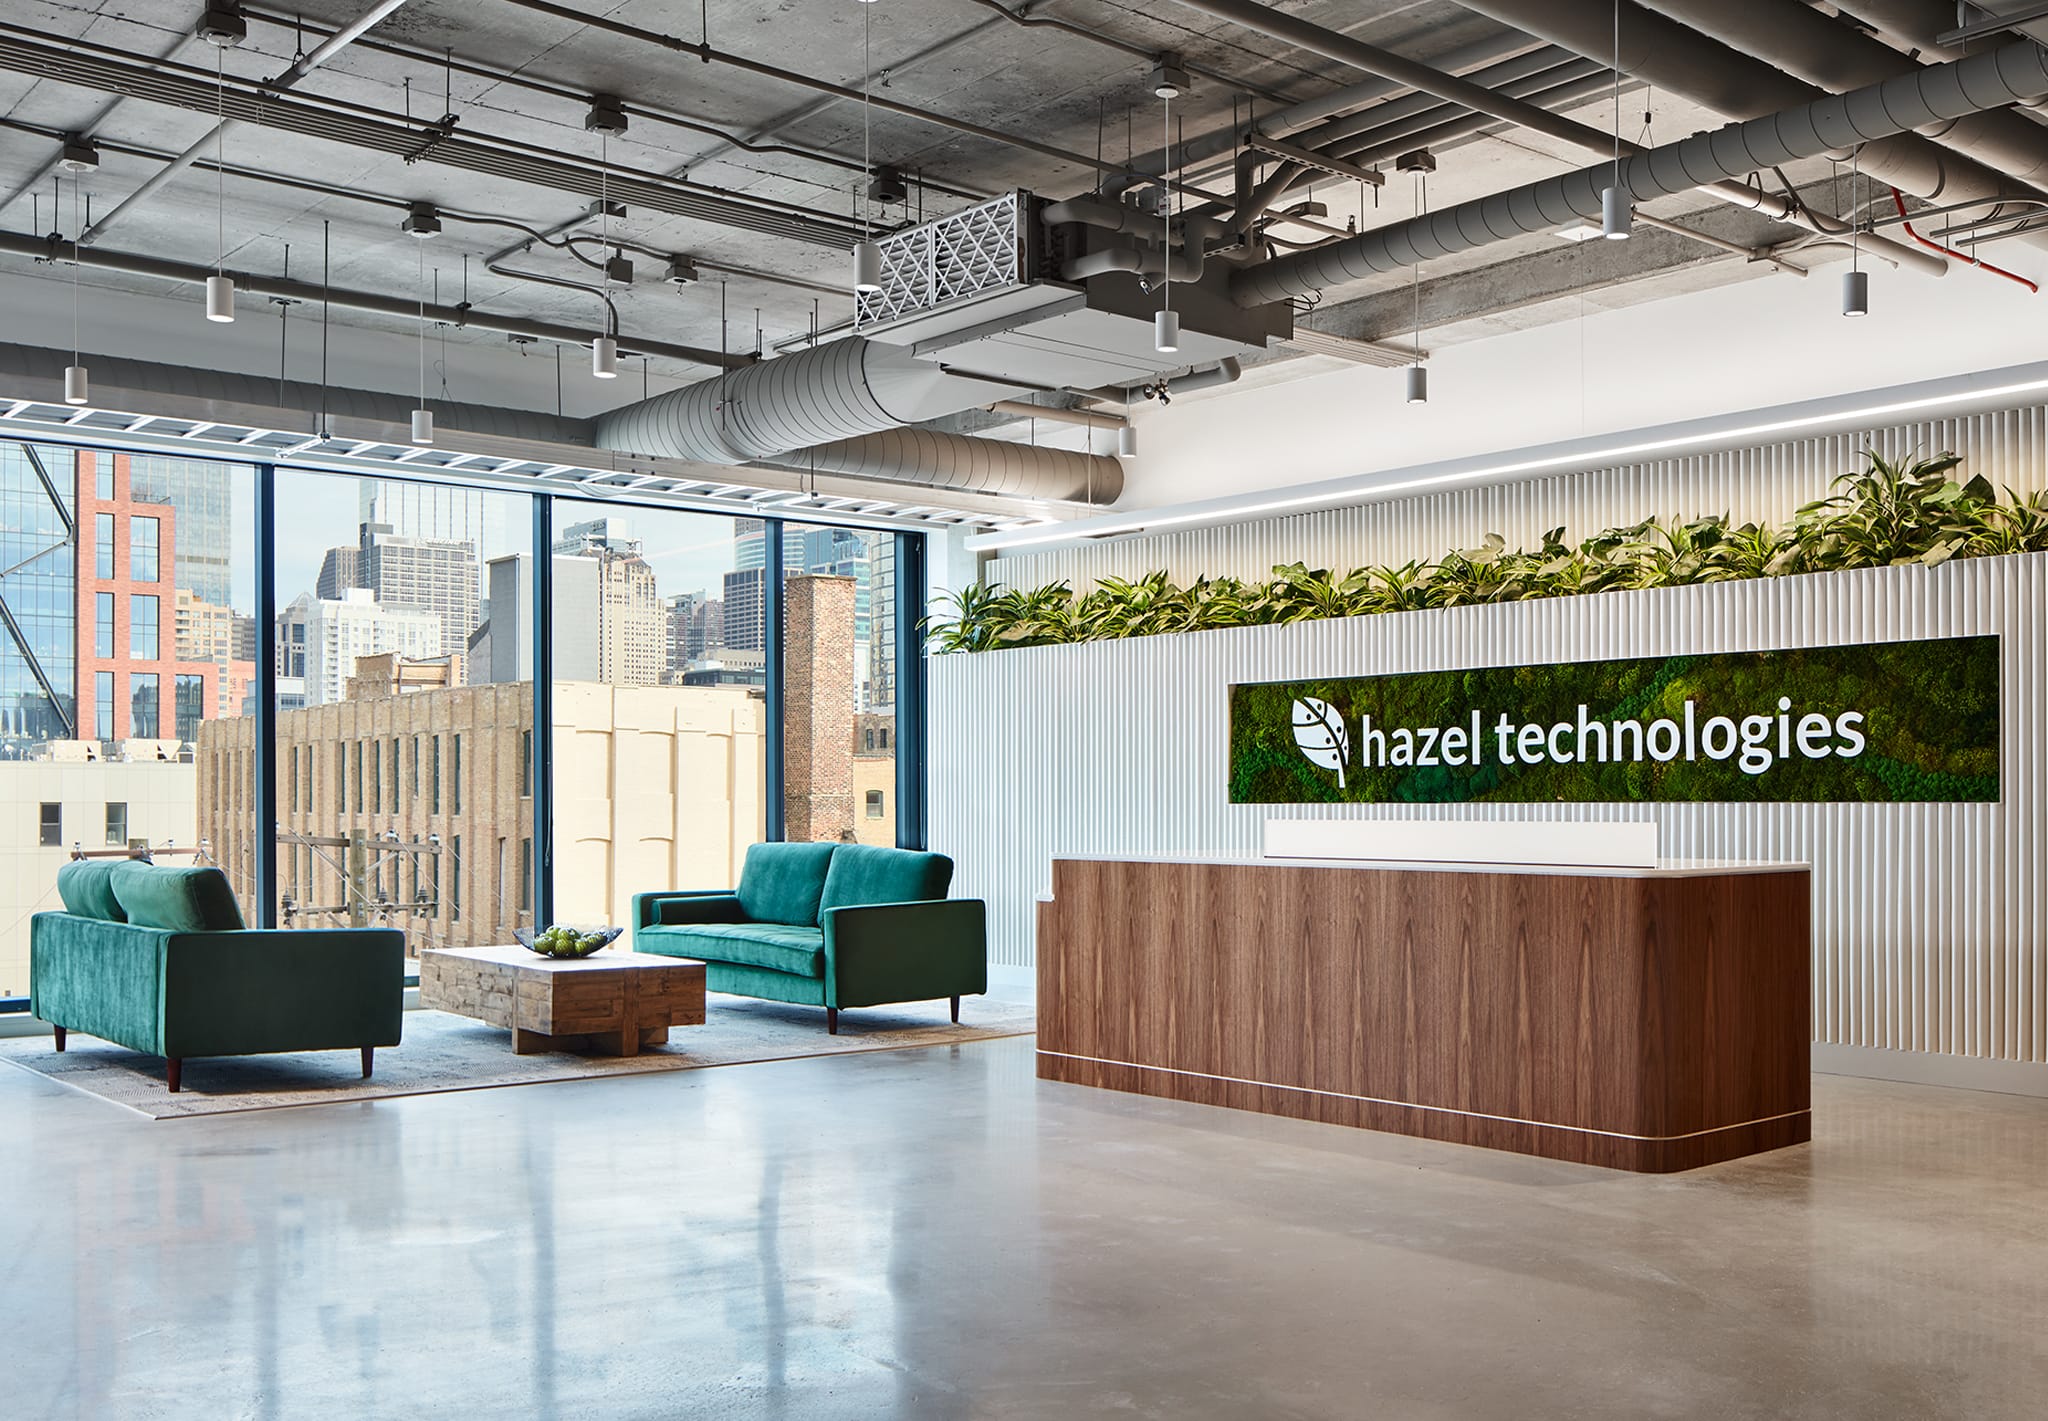 Skender Completes Construction of Lab and Office for Hazel Technologies at 320 N. Sangamon in Chicago’s Fulton Market